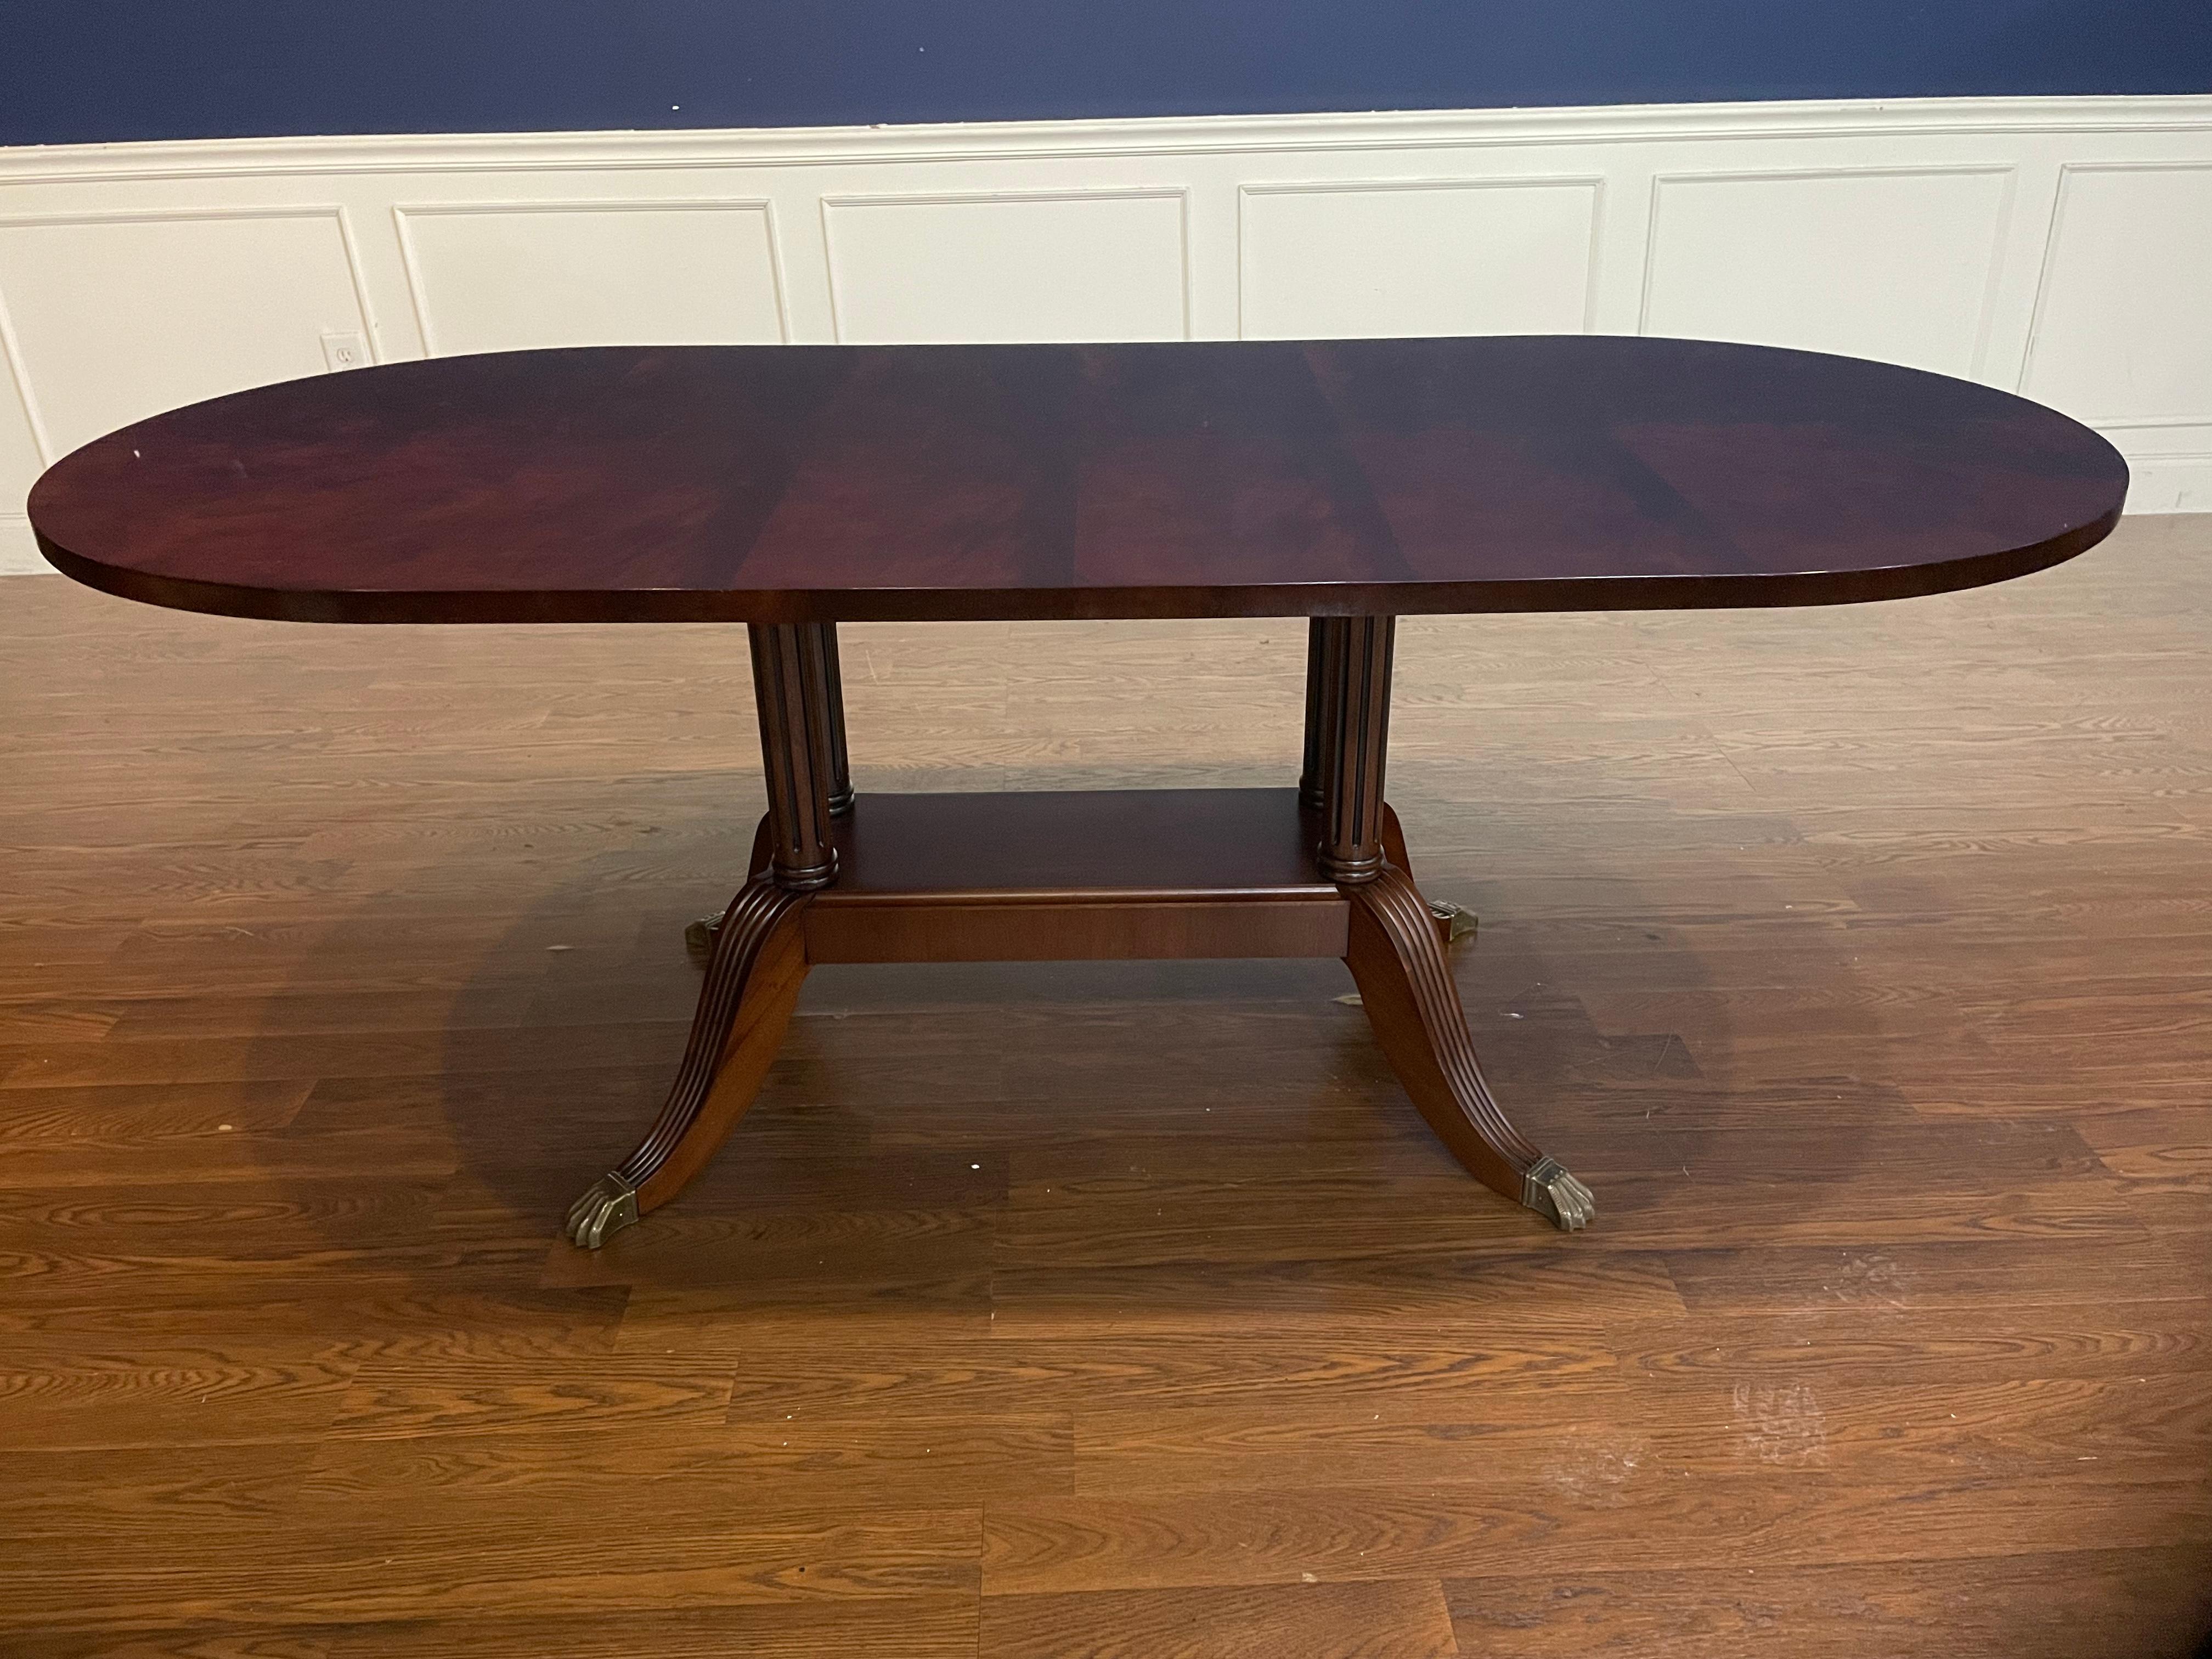 This is one of our smaller narrow mahogany tables with all of the typical character of our standard size tables but proportioned to fit ideally in a New York City style apartment or condo.  It can function as a dining table, breakfast table, meeting